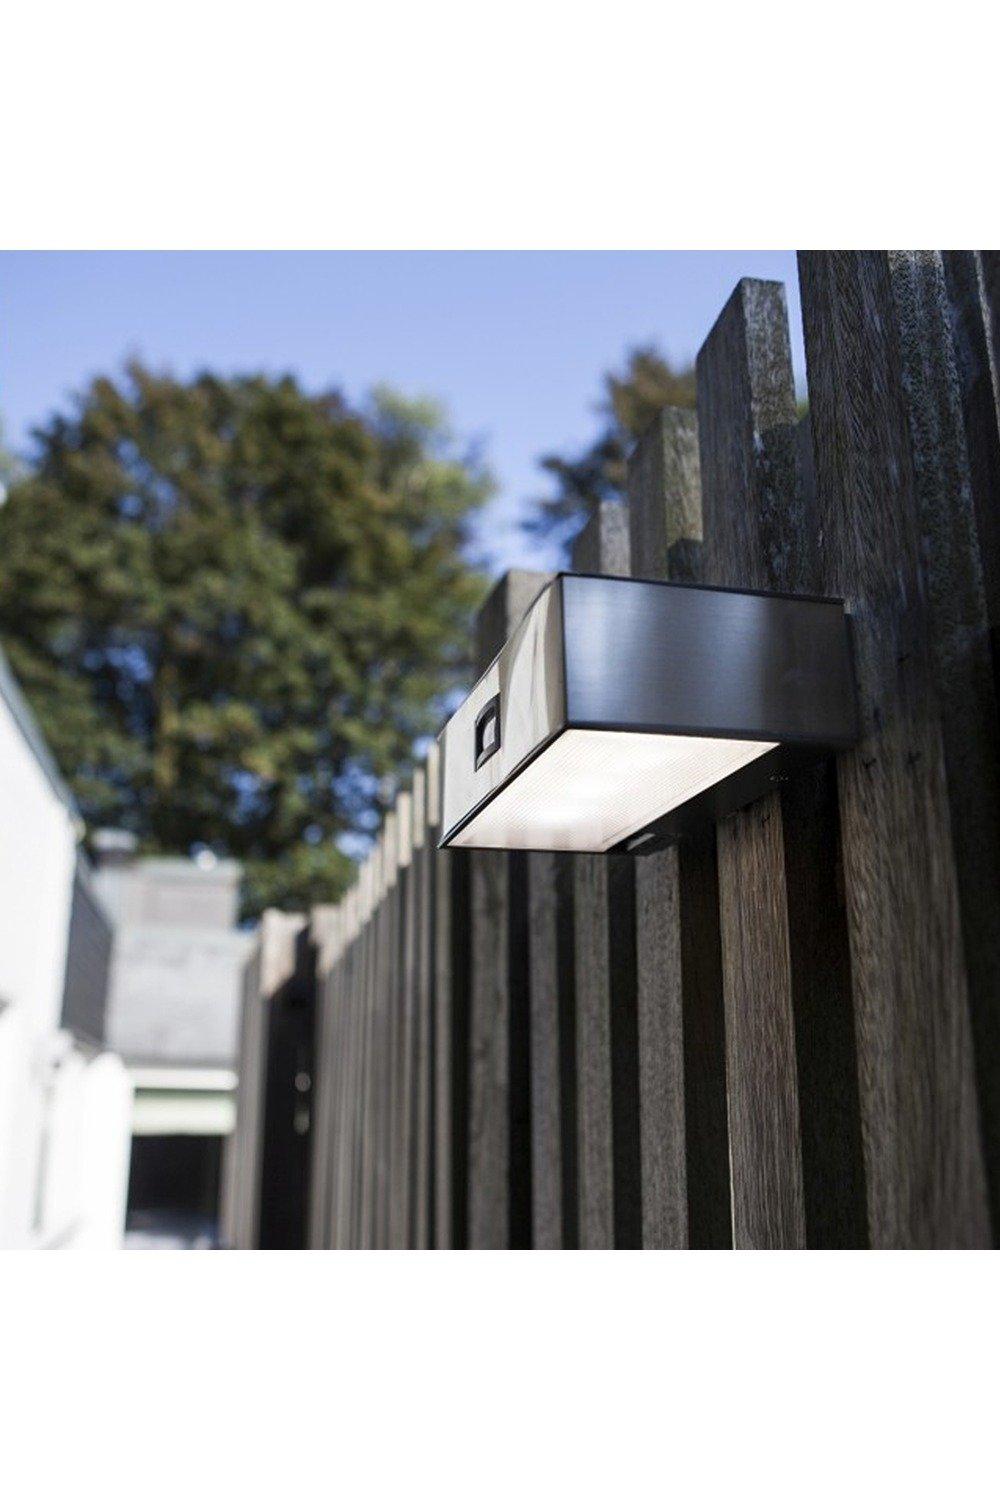 'Kirby' Stainless Steel LED Solar Outdoor Wall Light With Motion Sensor